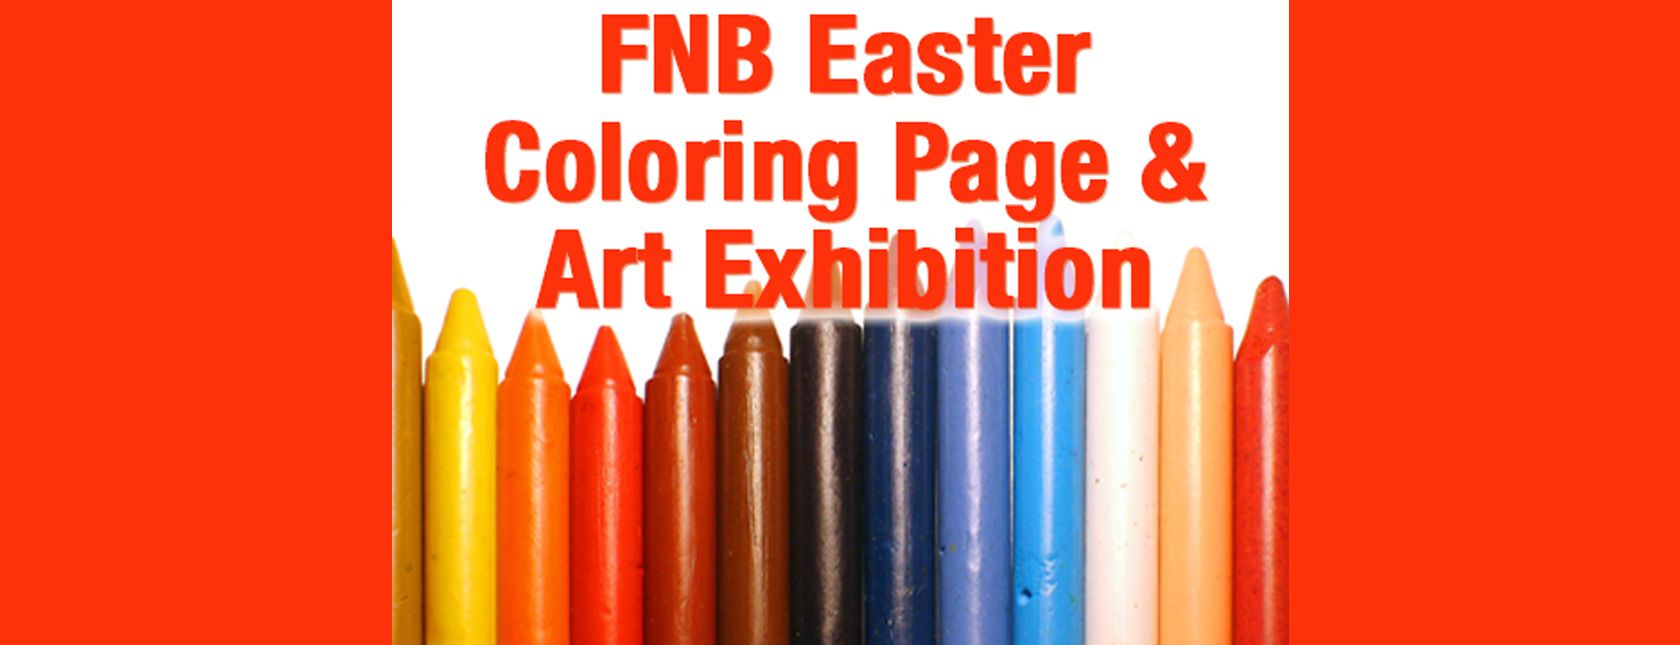 Coloring Page and Art Exhibition Happening Now at FNB!